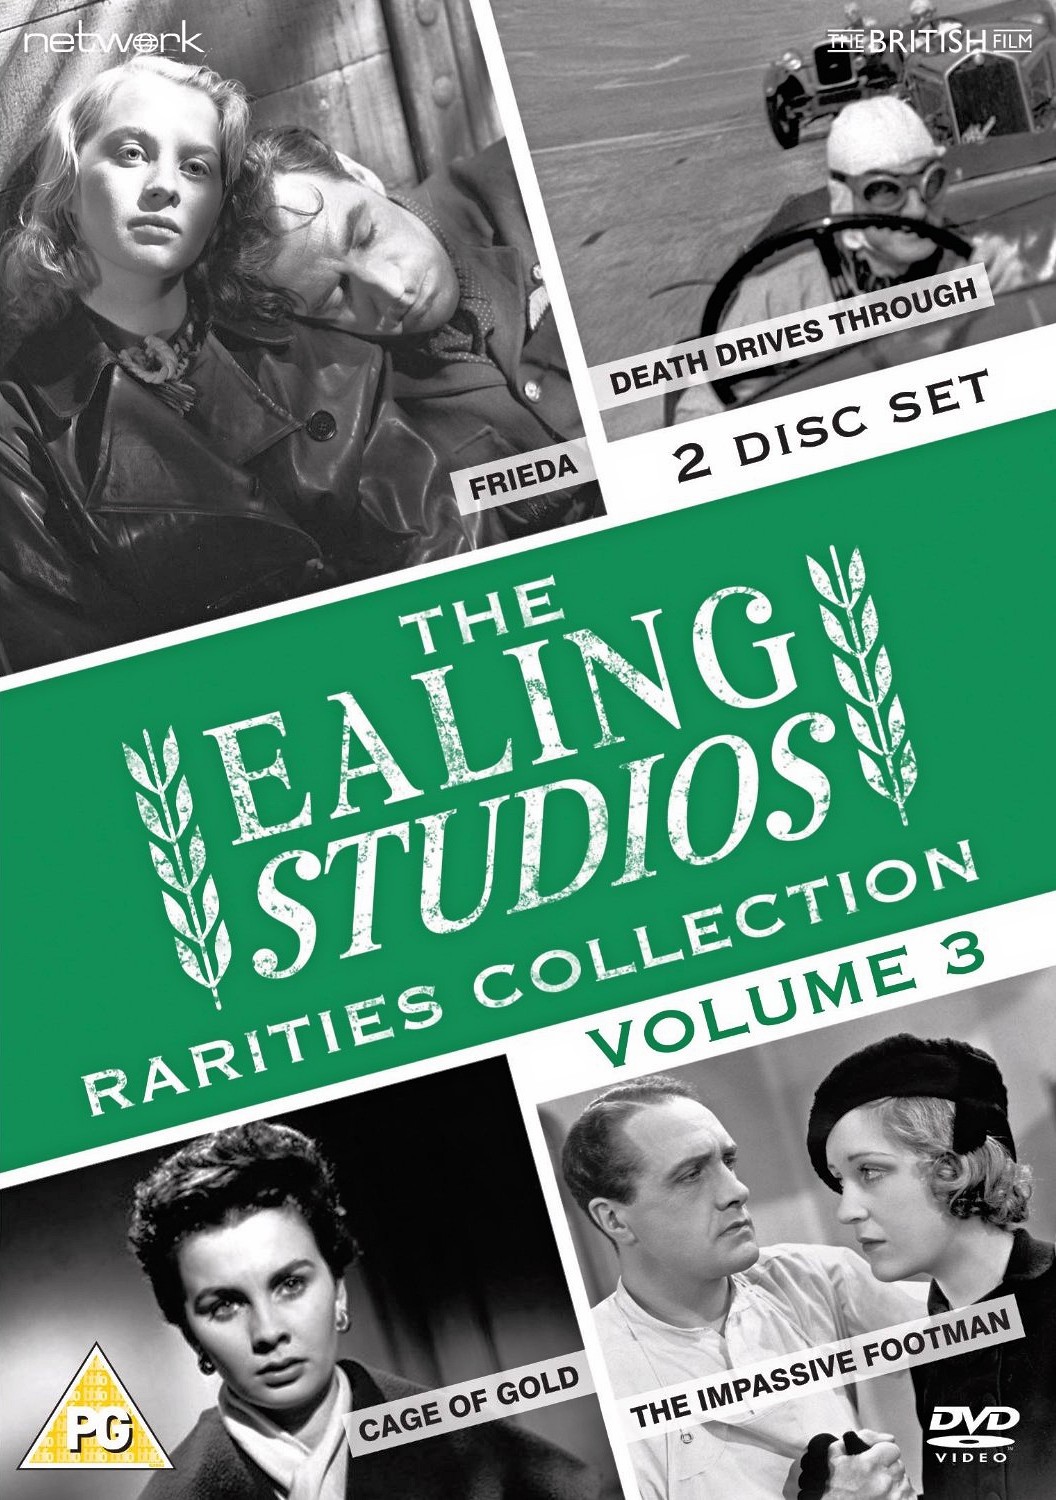 The Ealing Studios Rarities Collection DVD – Volume 3 from Network as part of the British Film collection. Features Cage of Gold, Death Drives Through, The Impassive Footman, Frieda